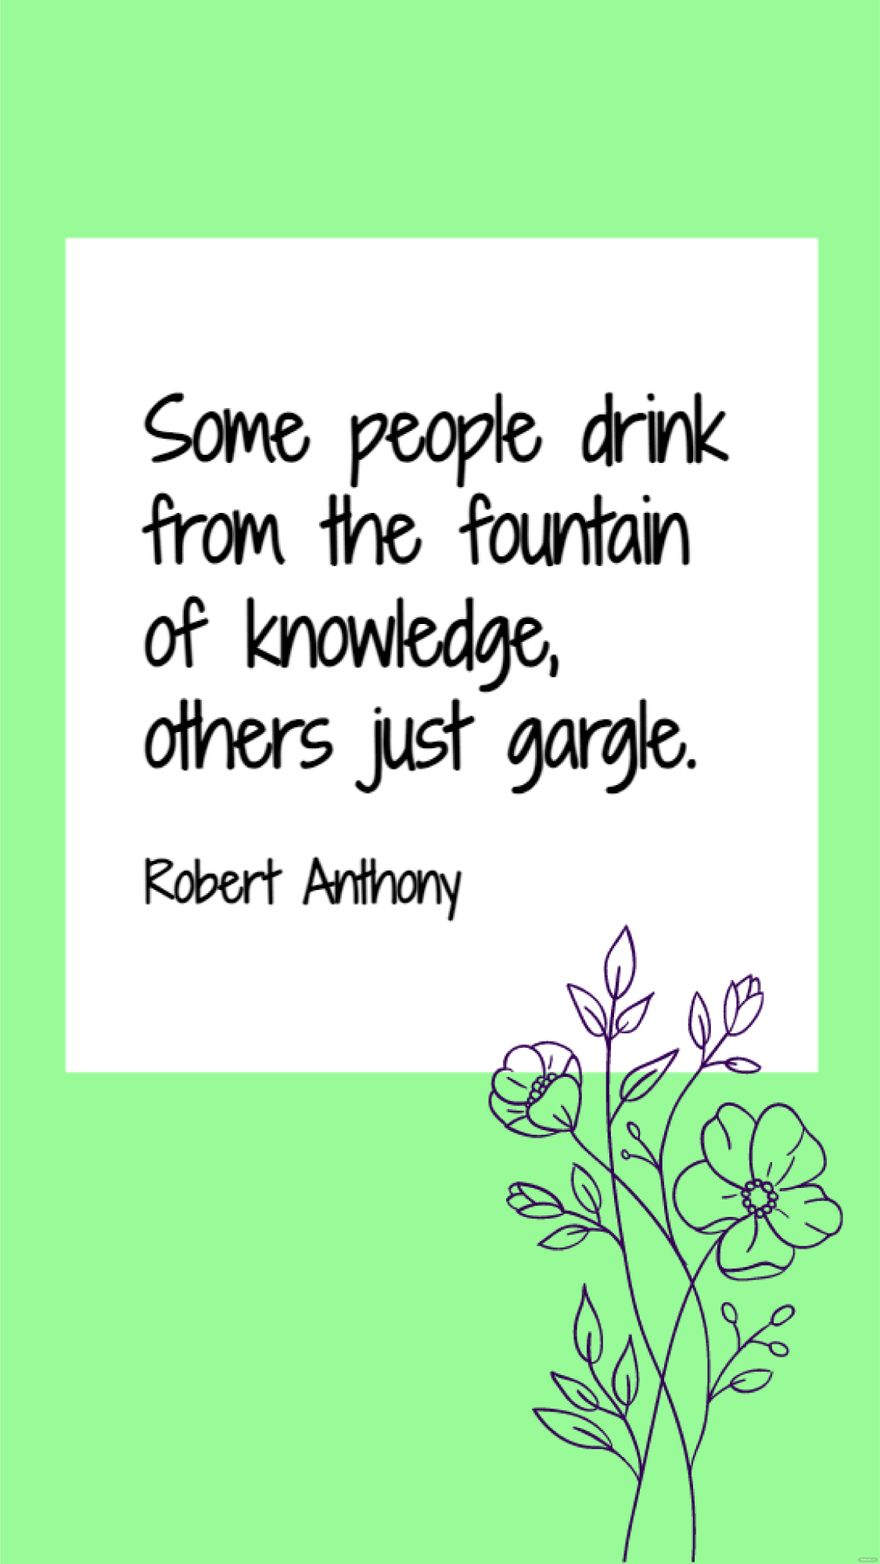 Free Robert Anthony - Some people drink from the fountain of knowledge, others just gargle.